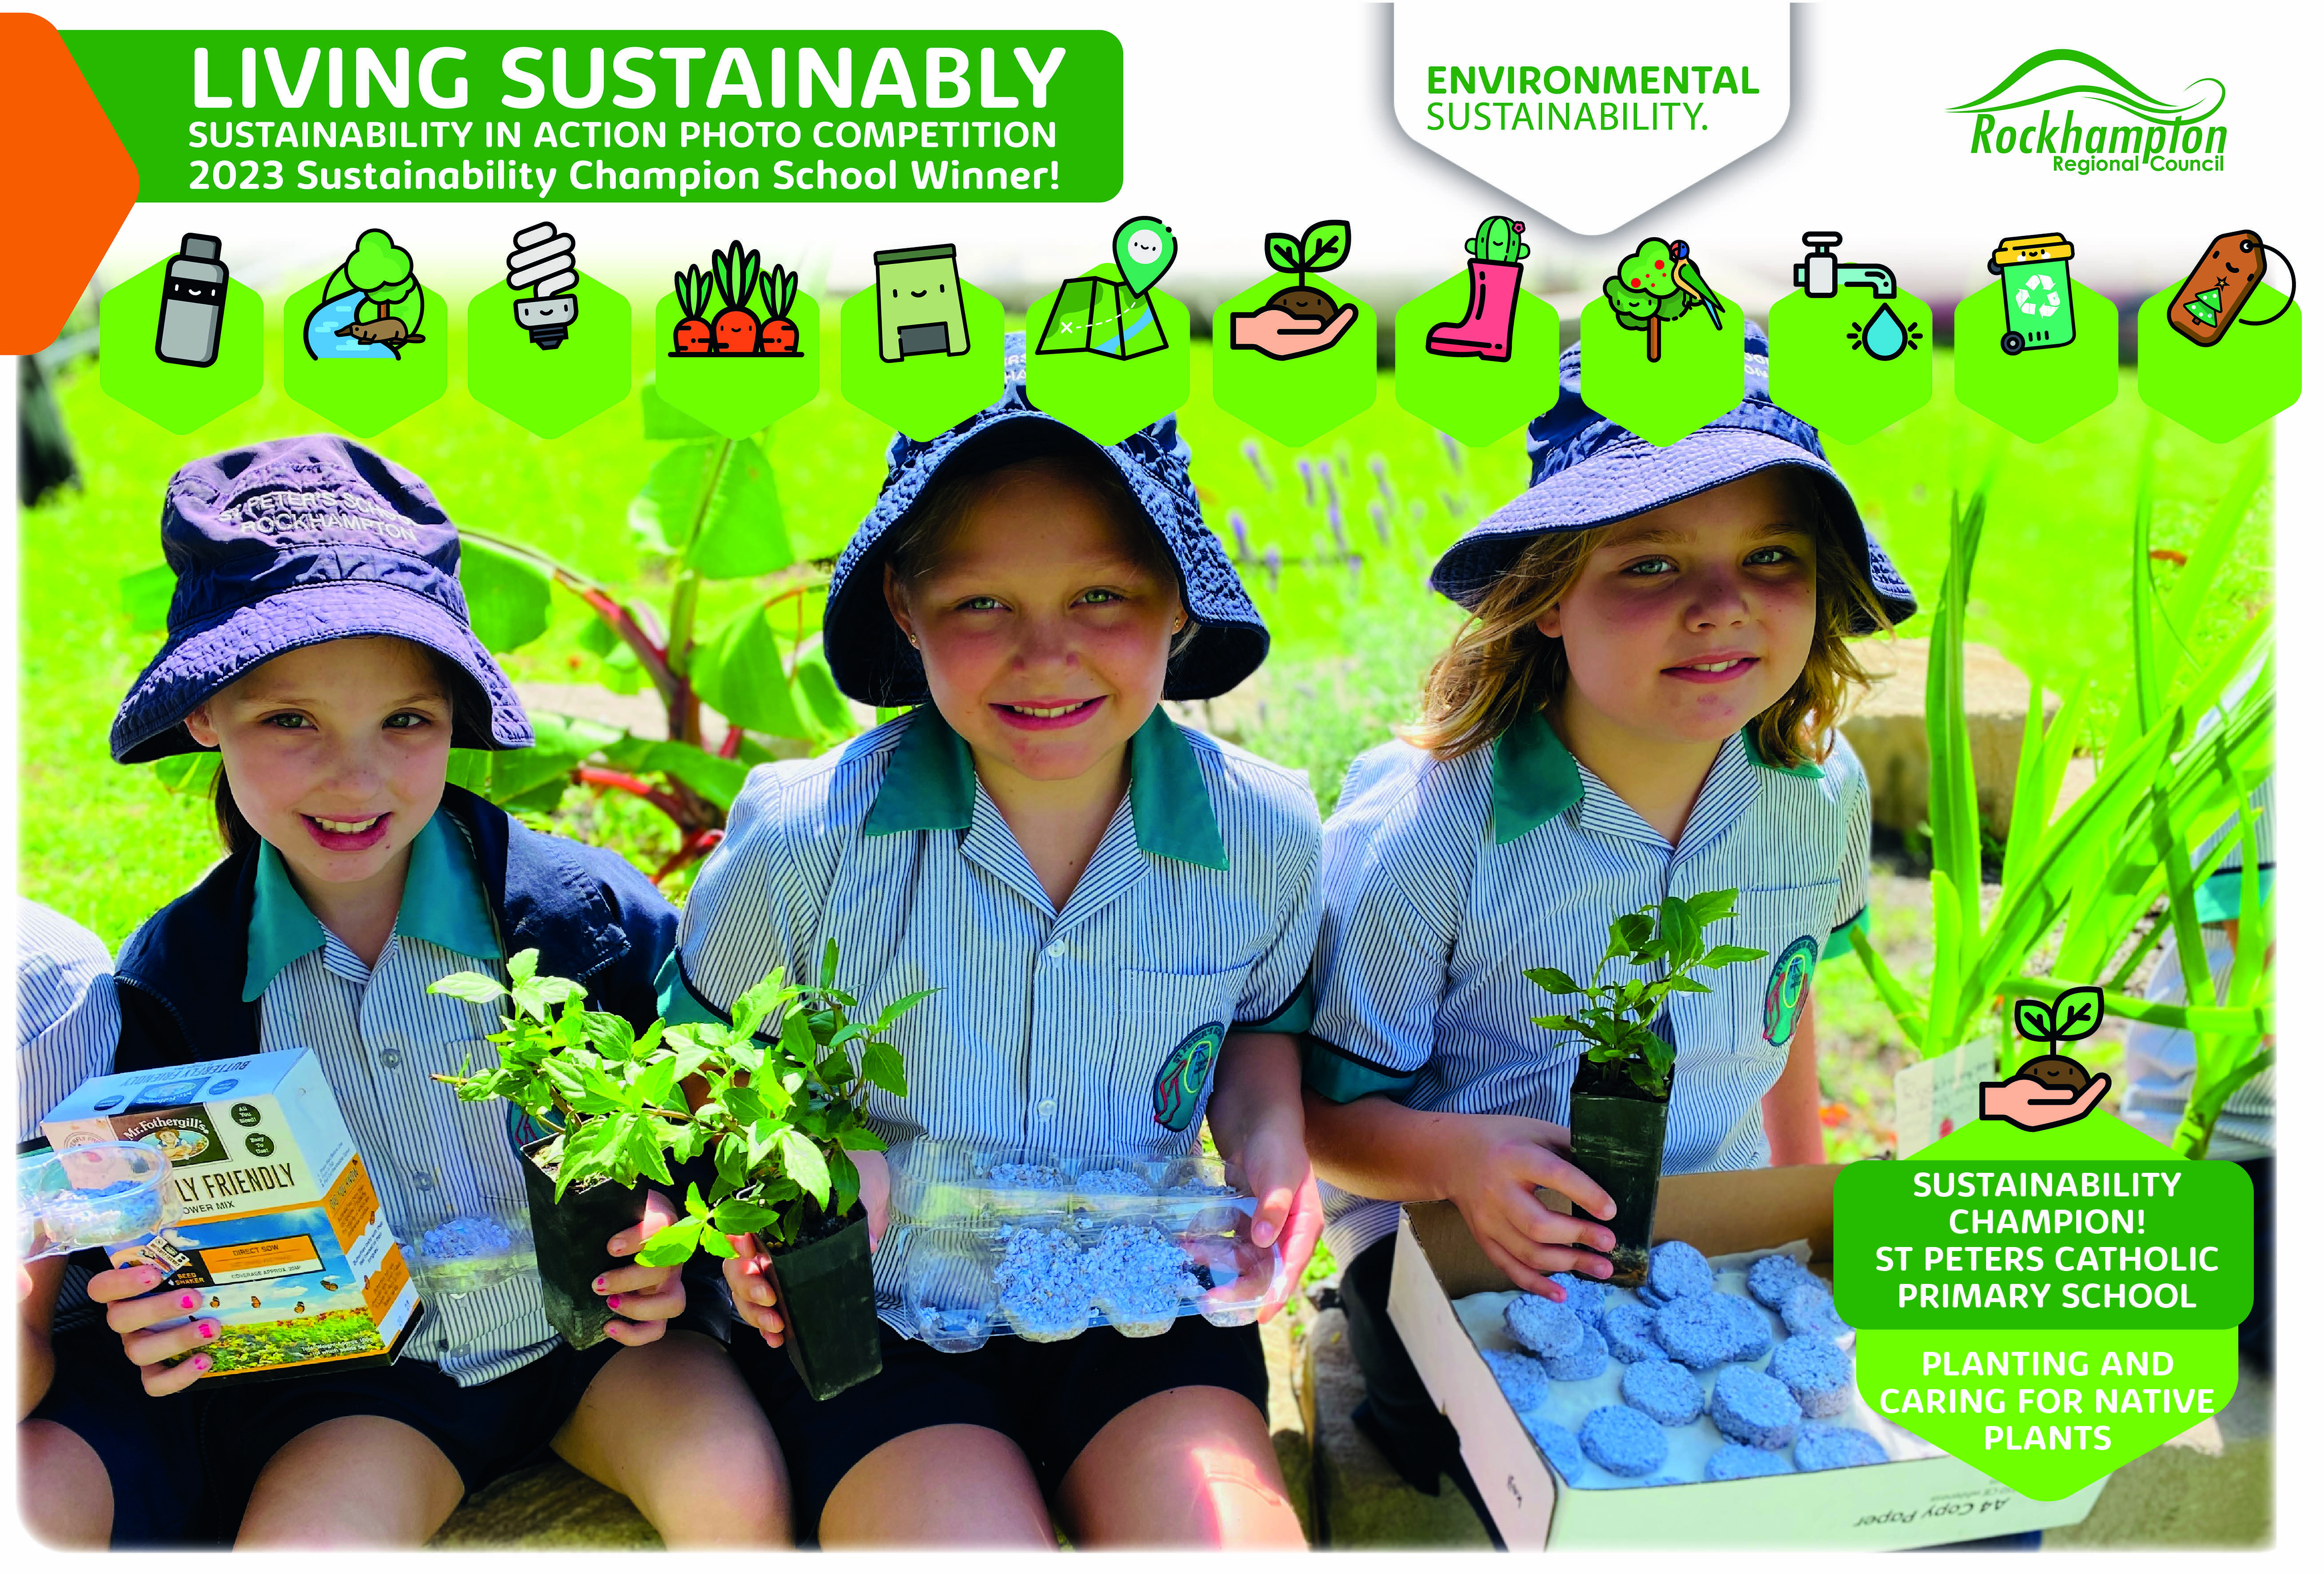 2023-SCHOOL-Sustainability-in-Action-Photo-Comp-St-Peters-Primary-School